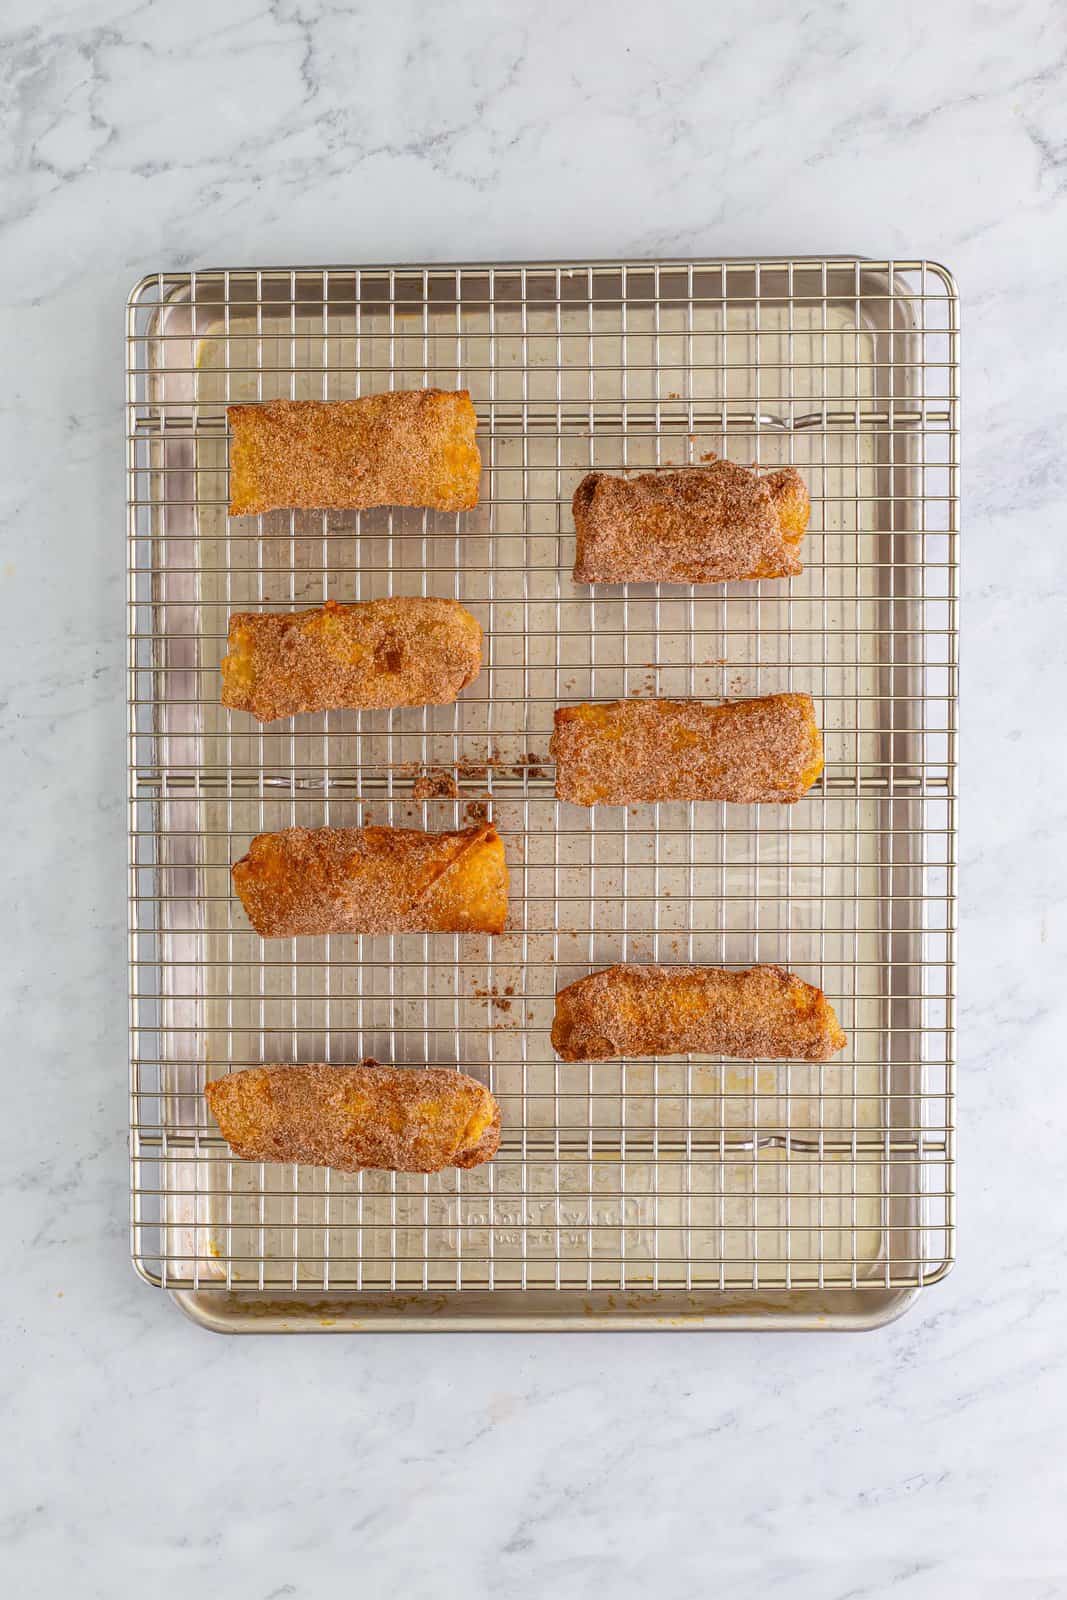 Cinnamon sugar coated apple pie egg rolls on a wire rack and baking sheet.